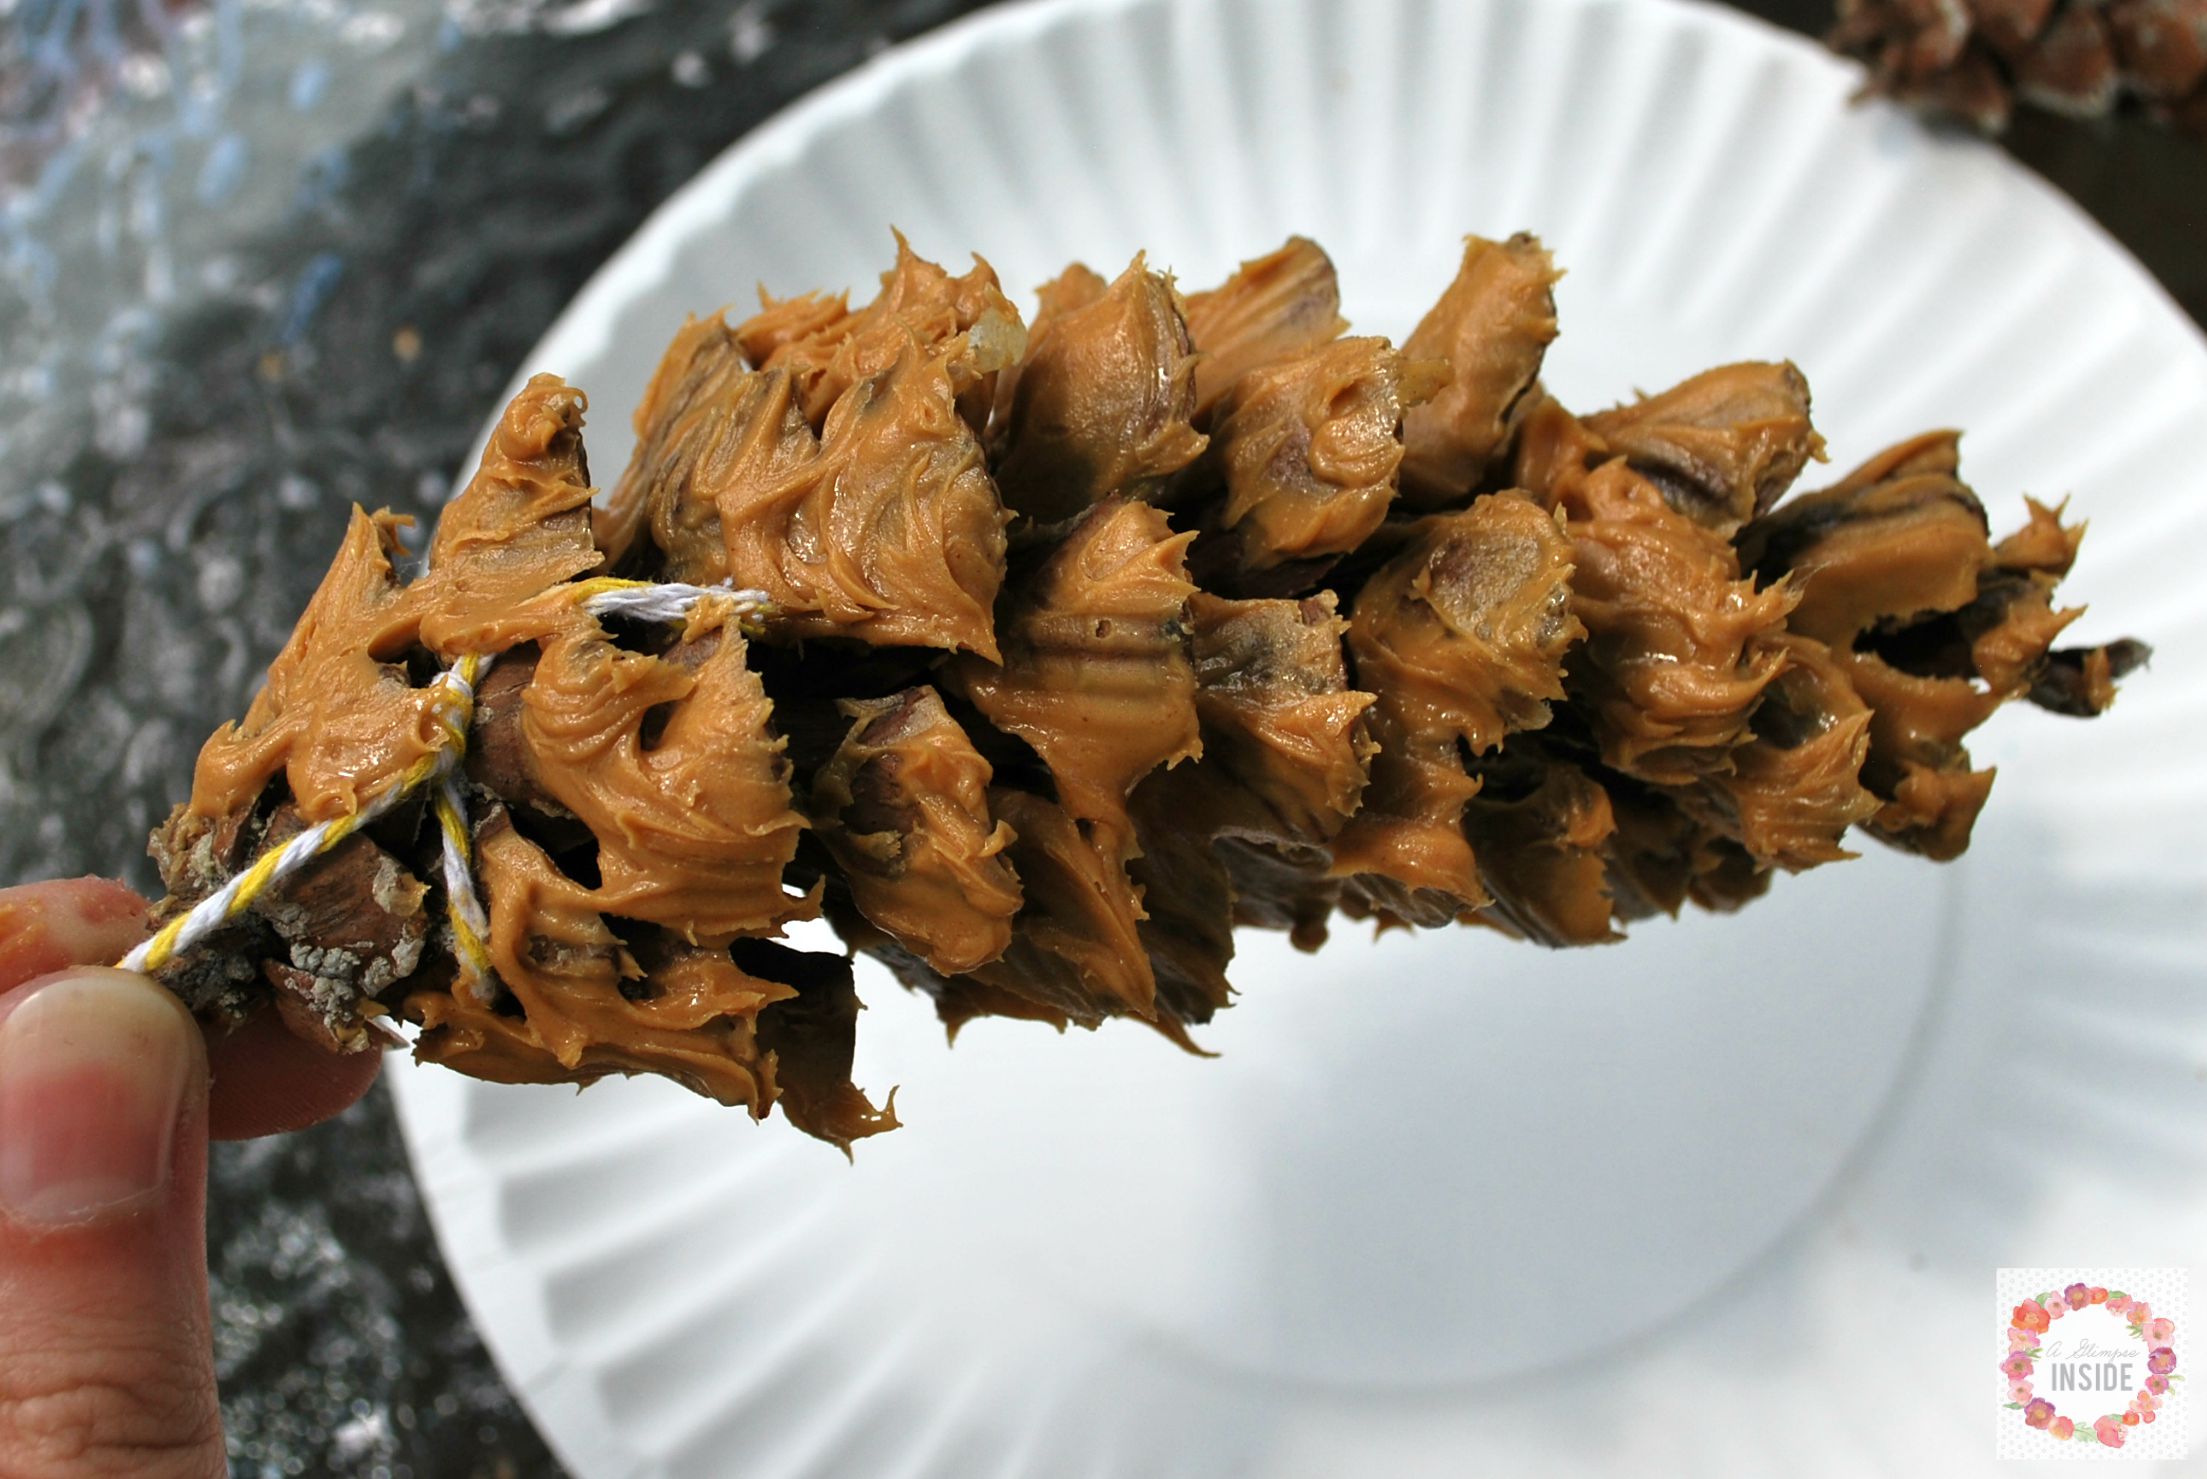 What is inside a pine cone?